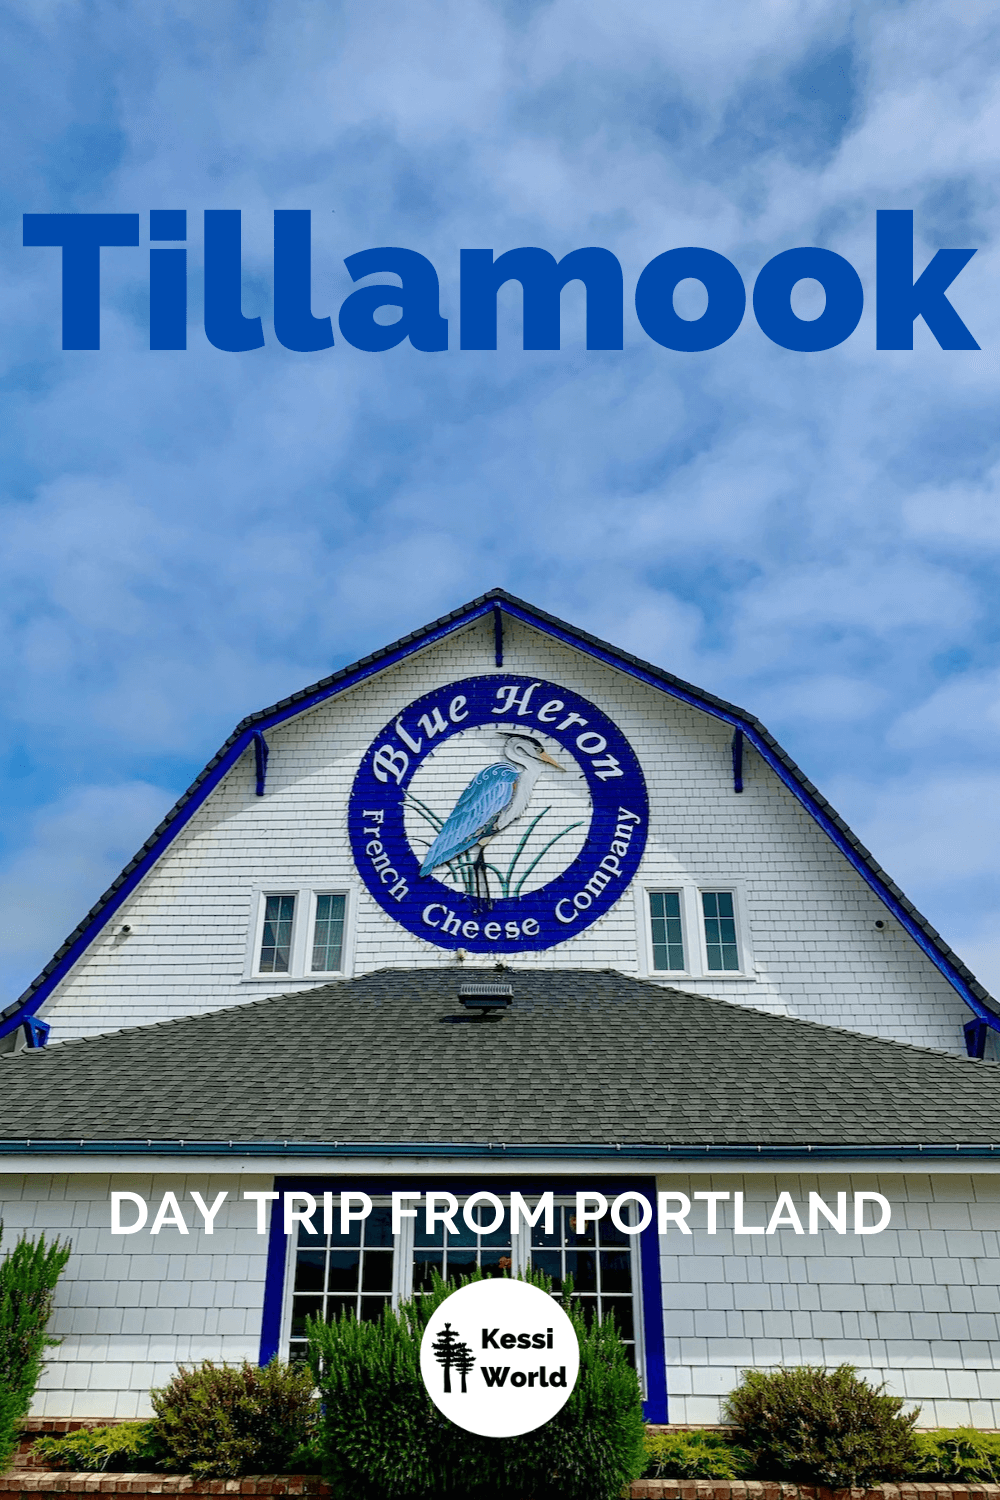 This Pinterest tile shows Blue Heron French Cheese Company is a whimsical barn painted a fresh white with French blue trim around the windows and dutch revival roof line. The plants in the front are bright green and the sky is blue. Tillamook makes a great day trip from Portland, Oregon